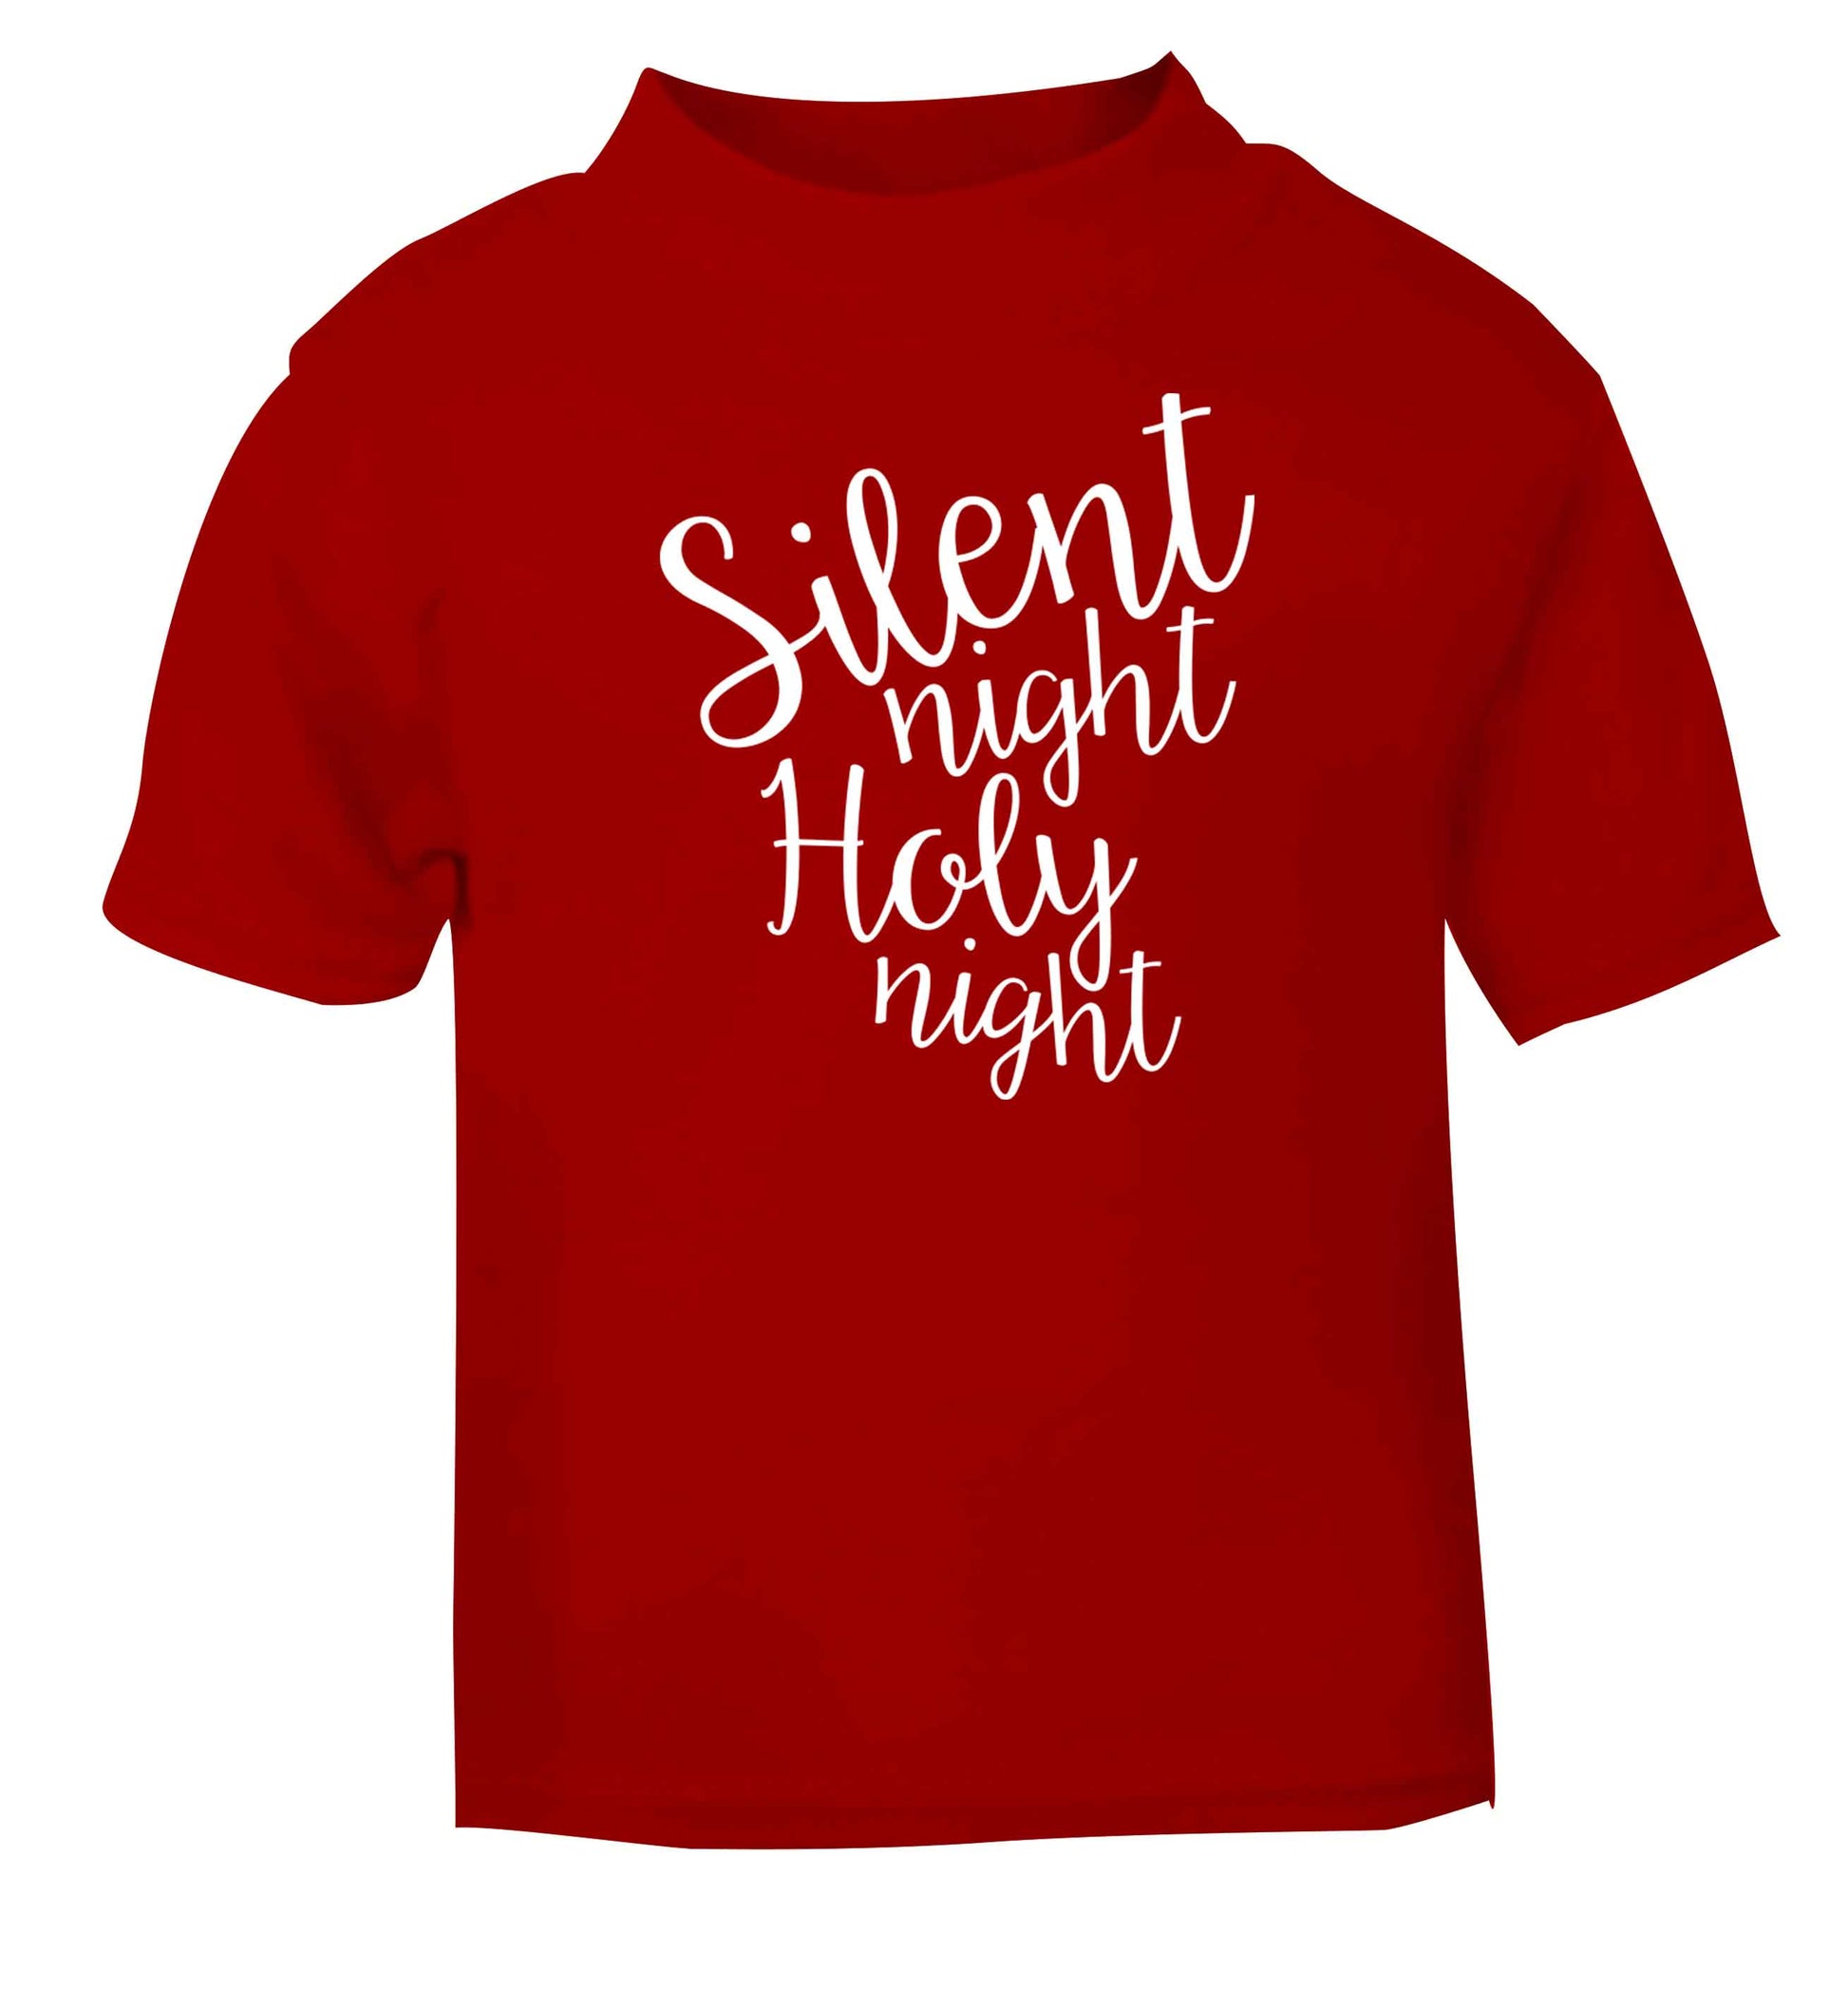 Silent night holy night red baby toddler Tshirt 2 Years